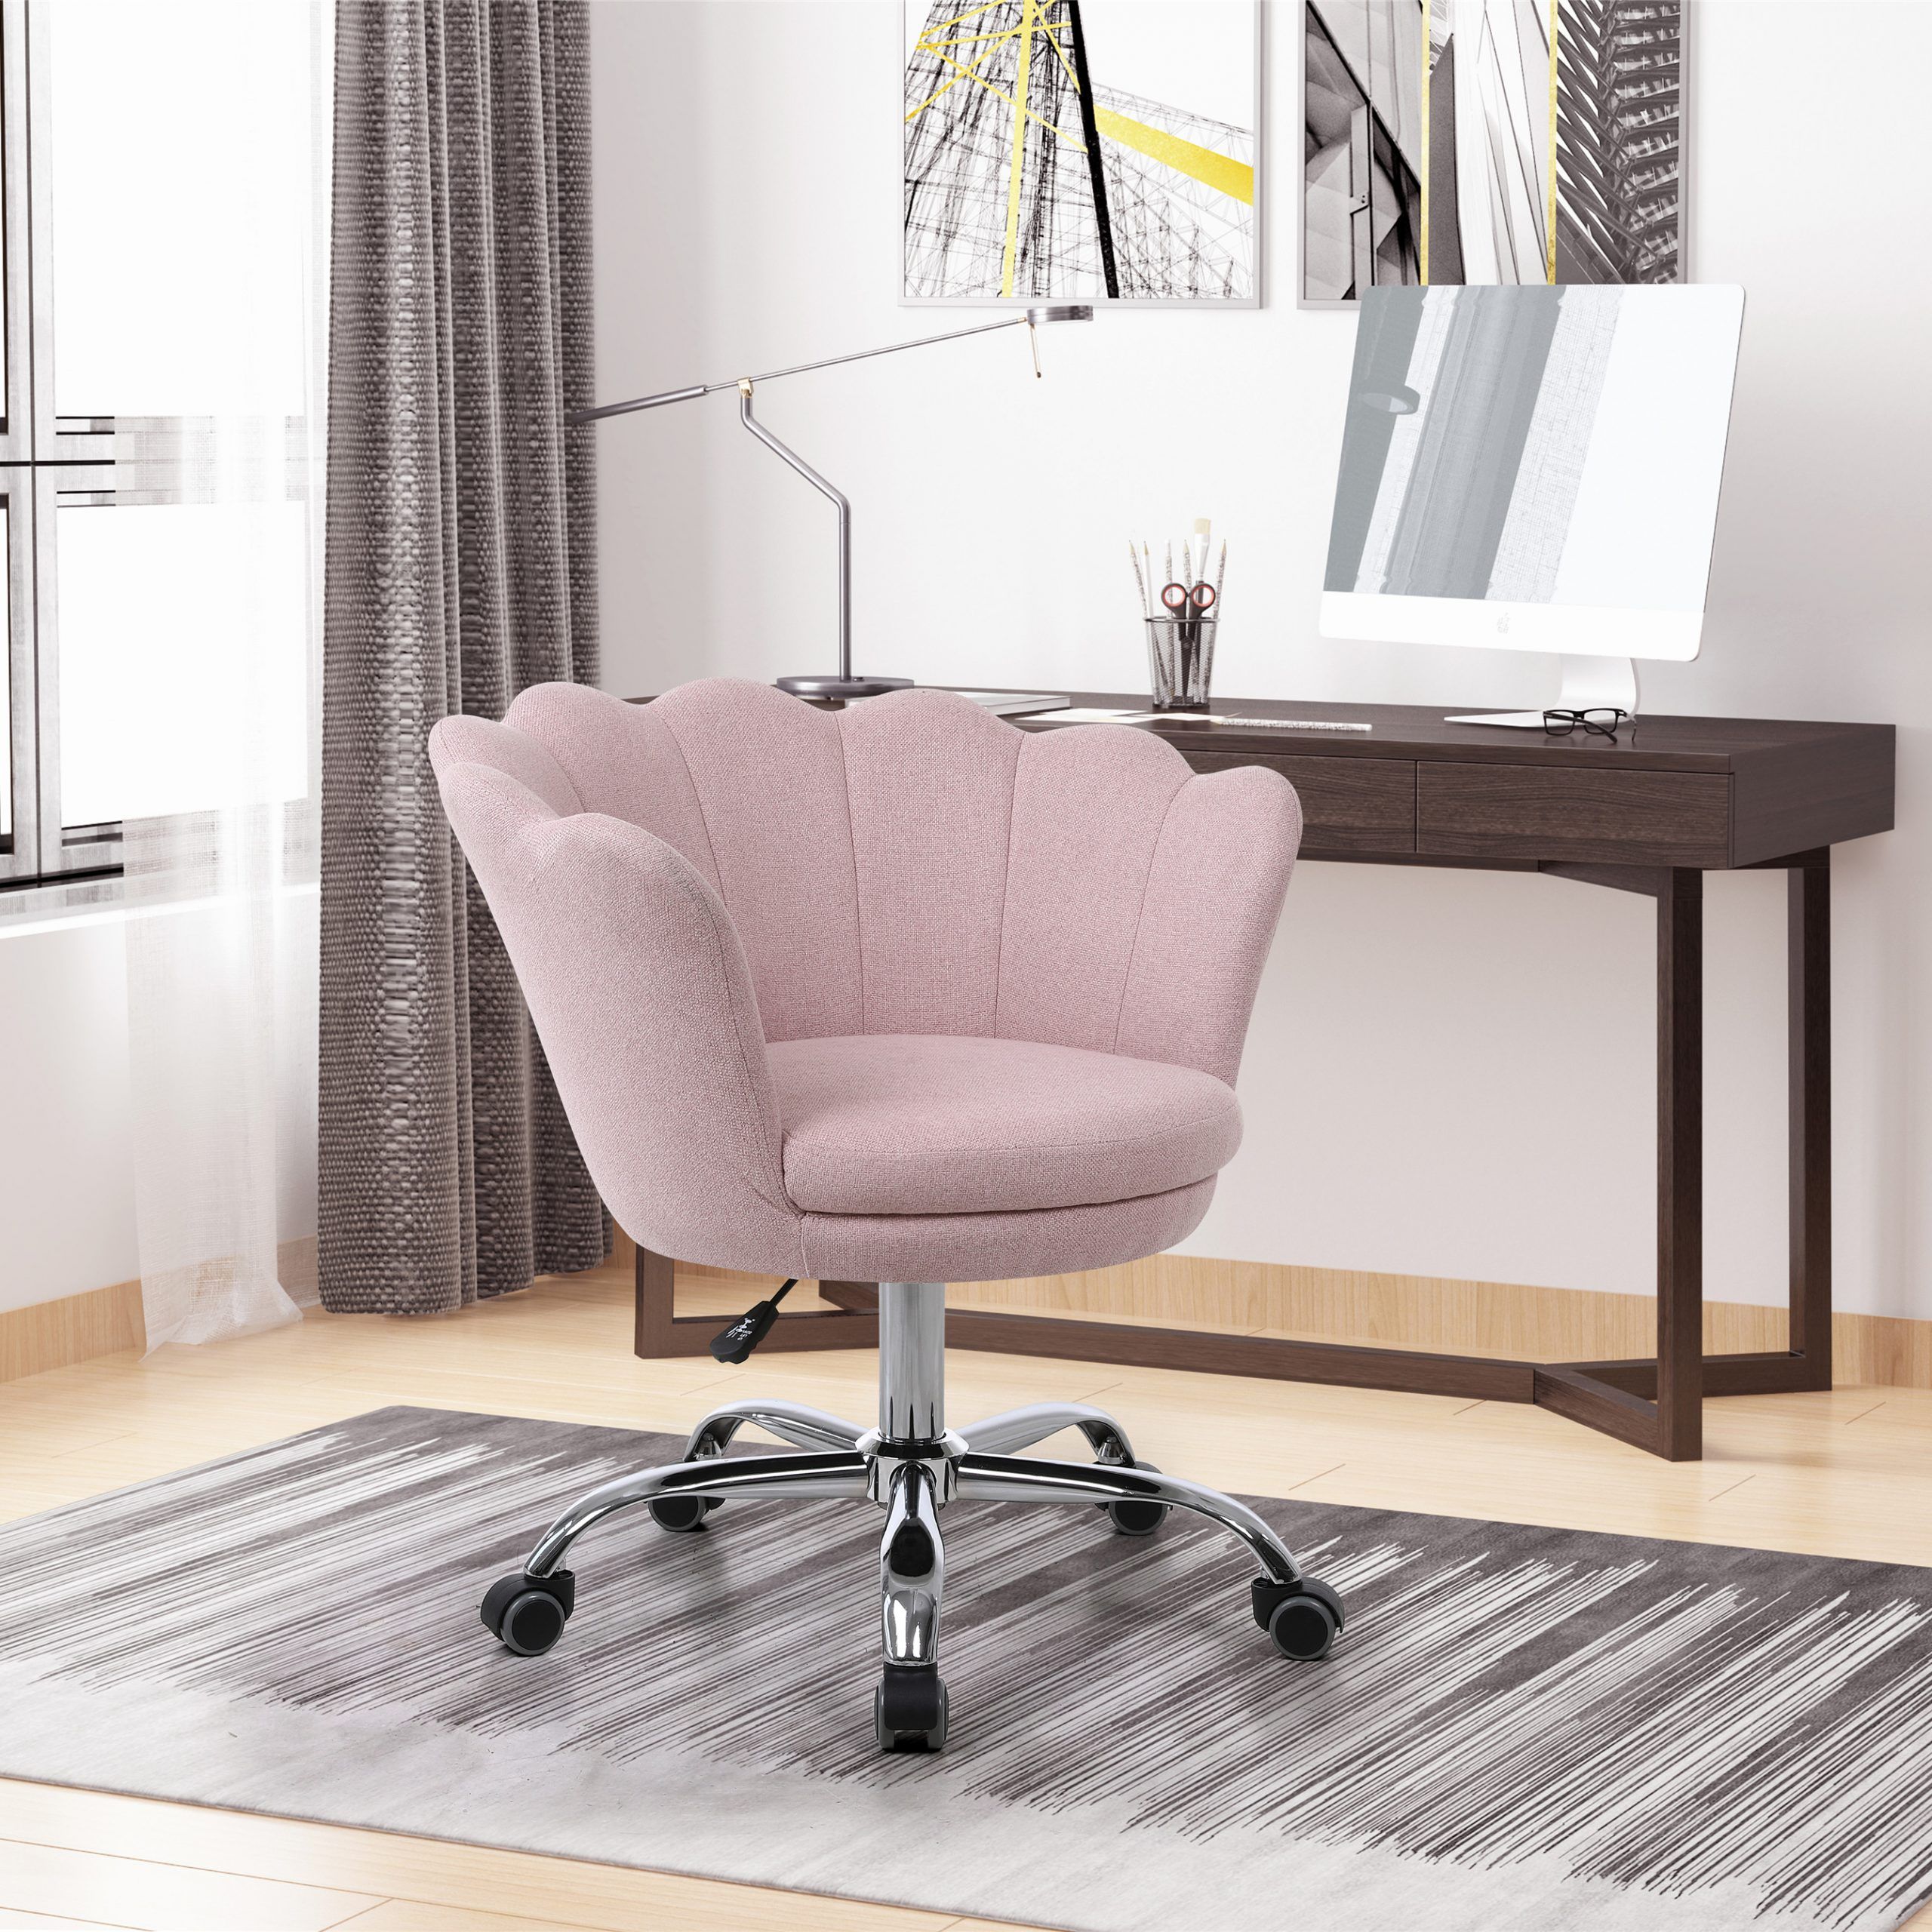 Home Office Swivel Chair, Linen Fabric Shell Chair With Adjustable Inside Modern Adjustable Back Outdoor Chairs (View 3 of 15)